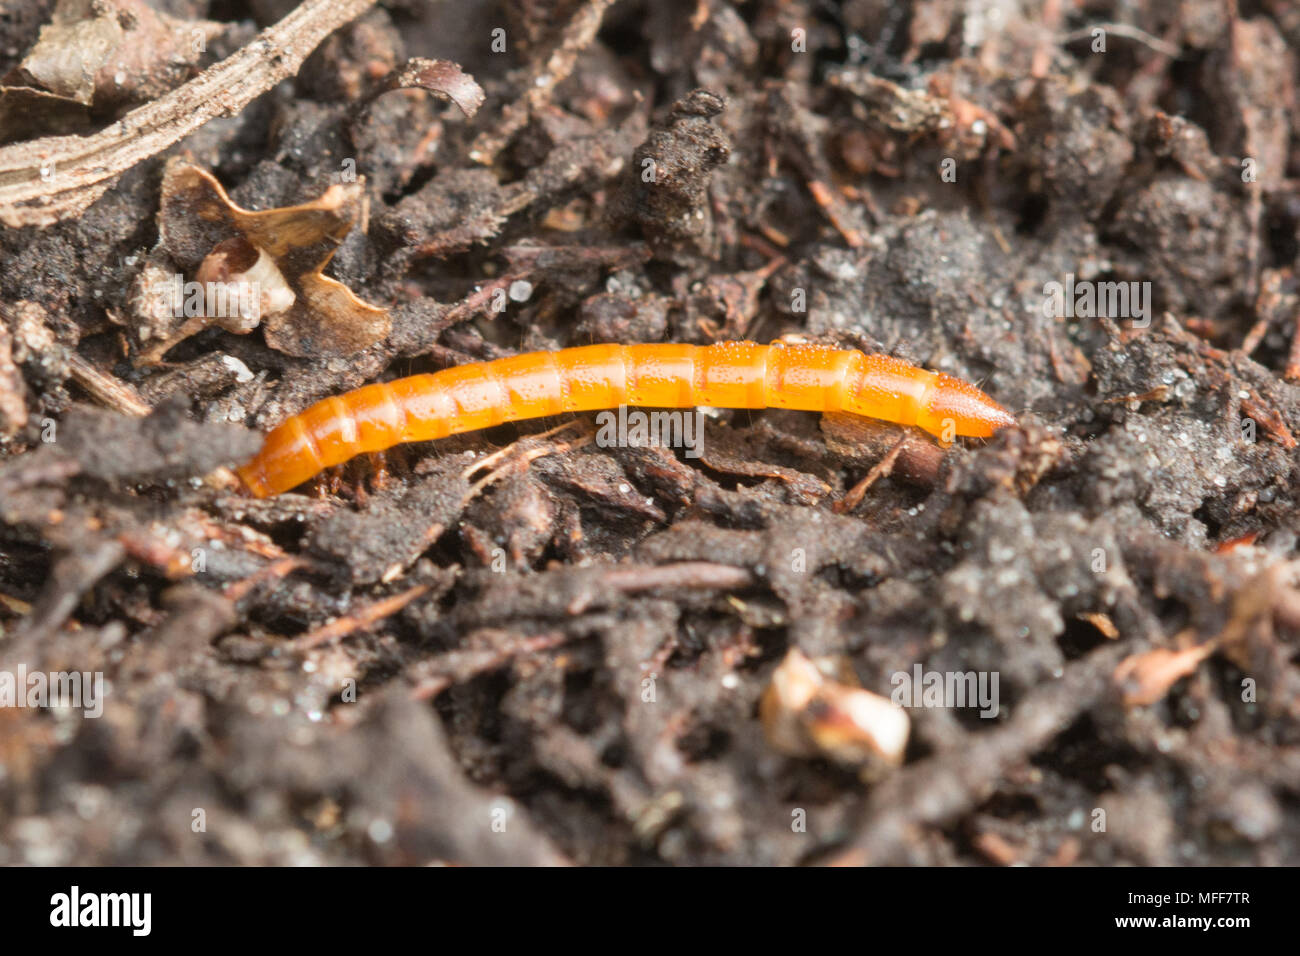 Wireworm, the larva of the click beetle, and a garden pest particularly among vegetable and potato growers Stock Photo